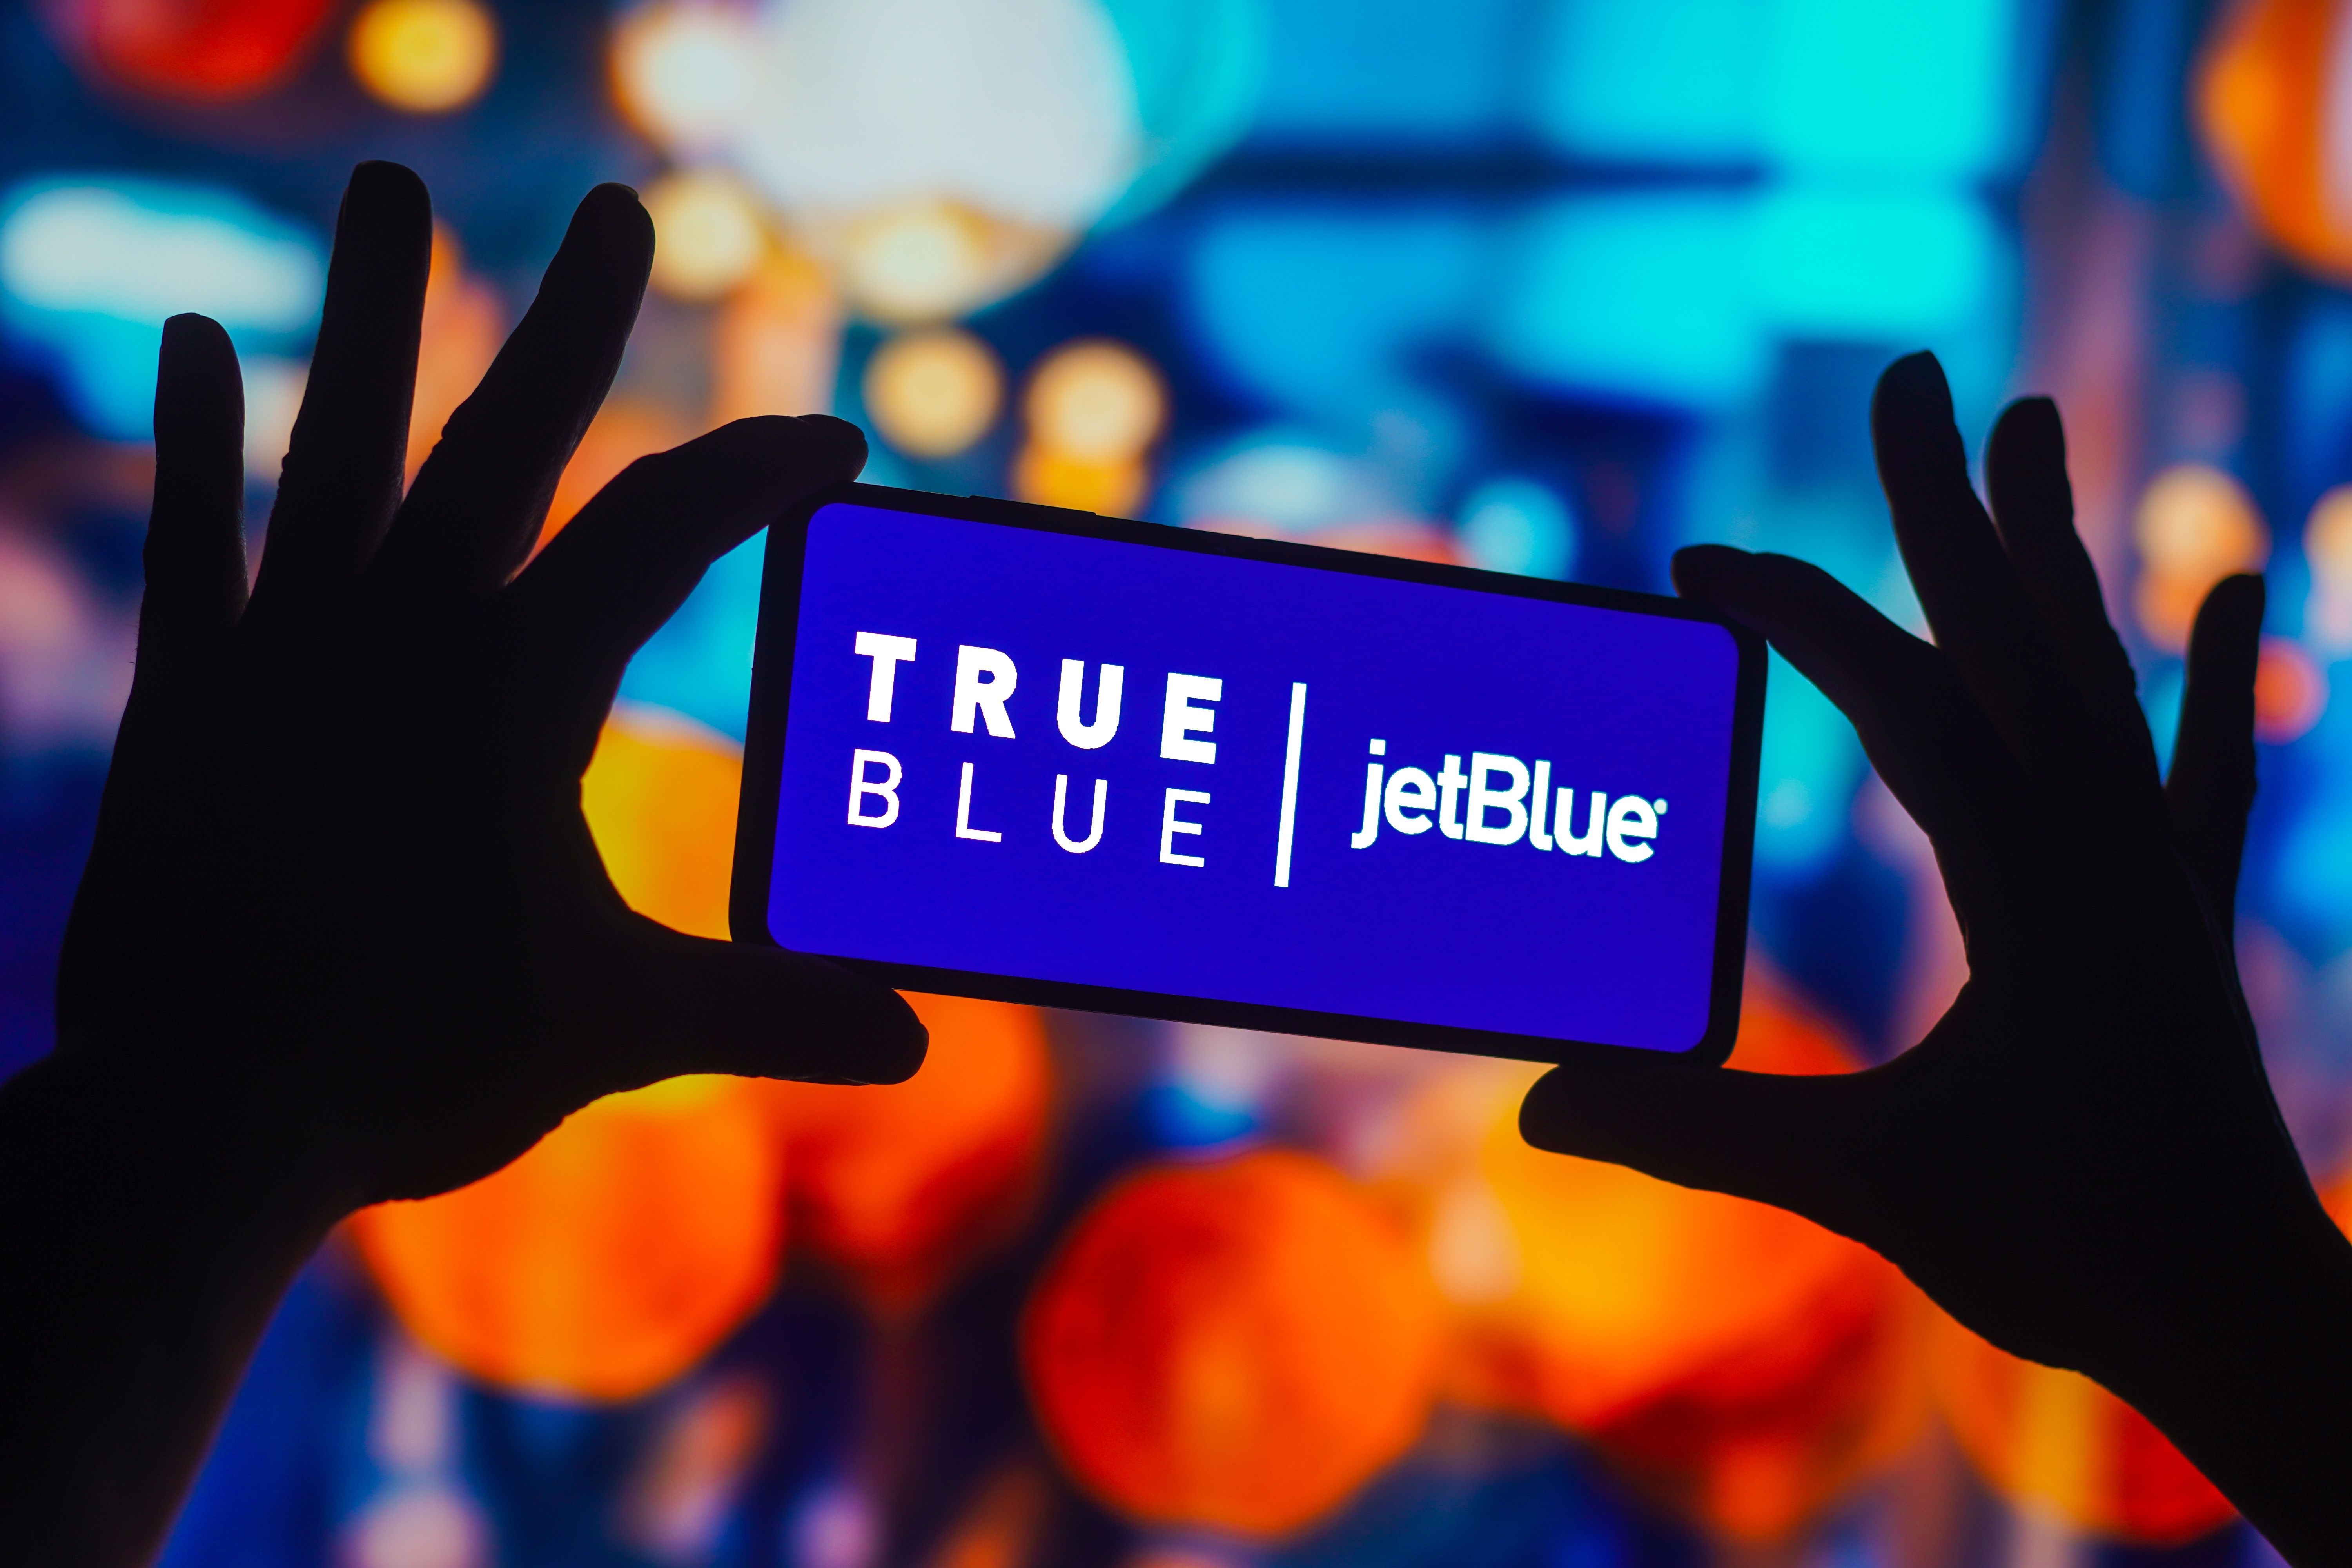 A person holding up a mobile device with the words JetBlue true blue written on it.